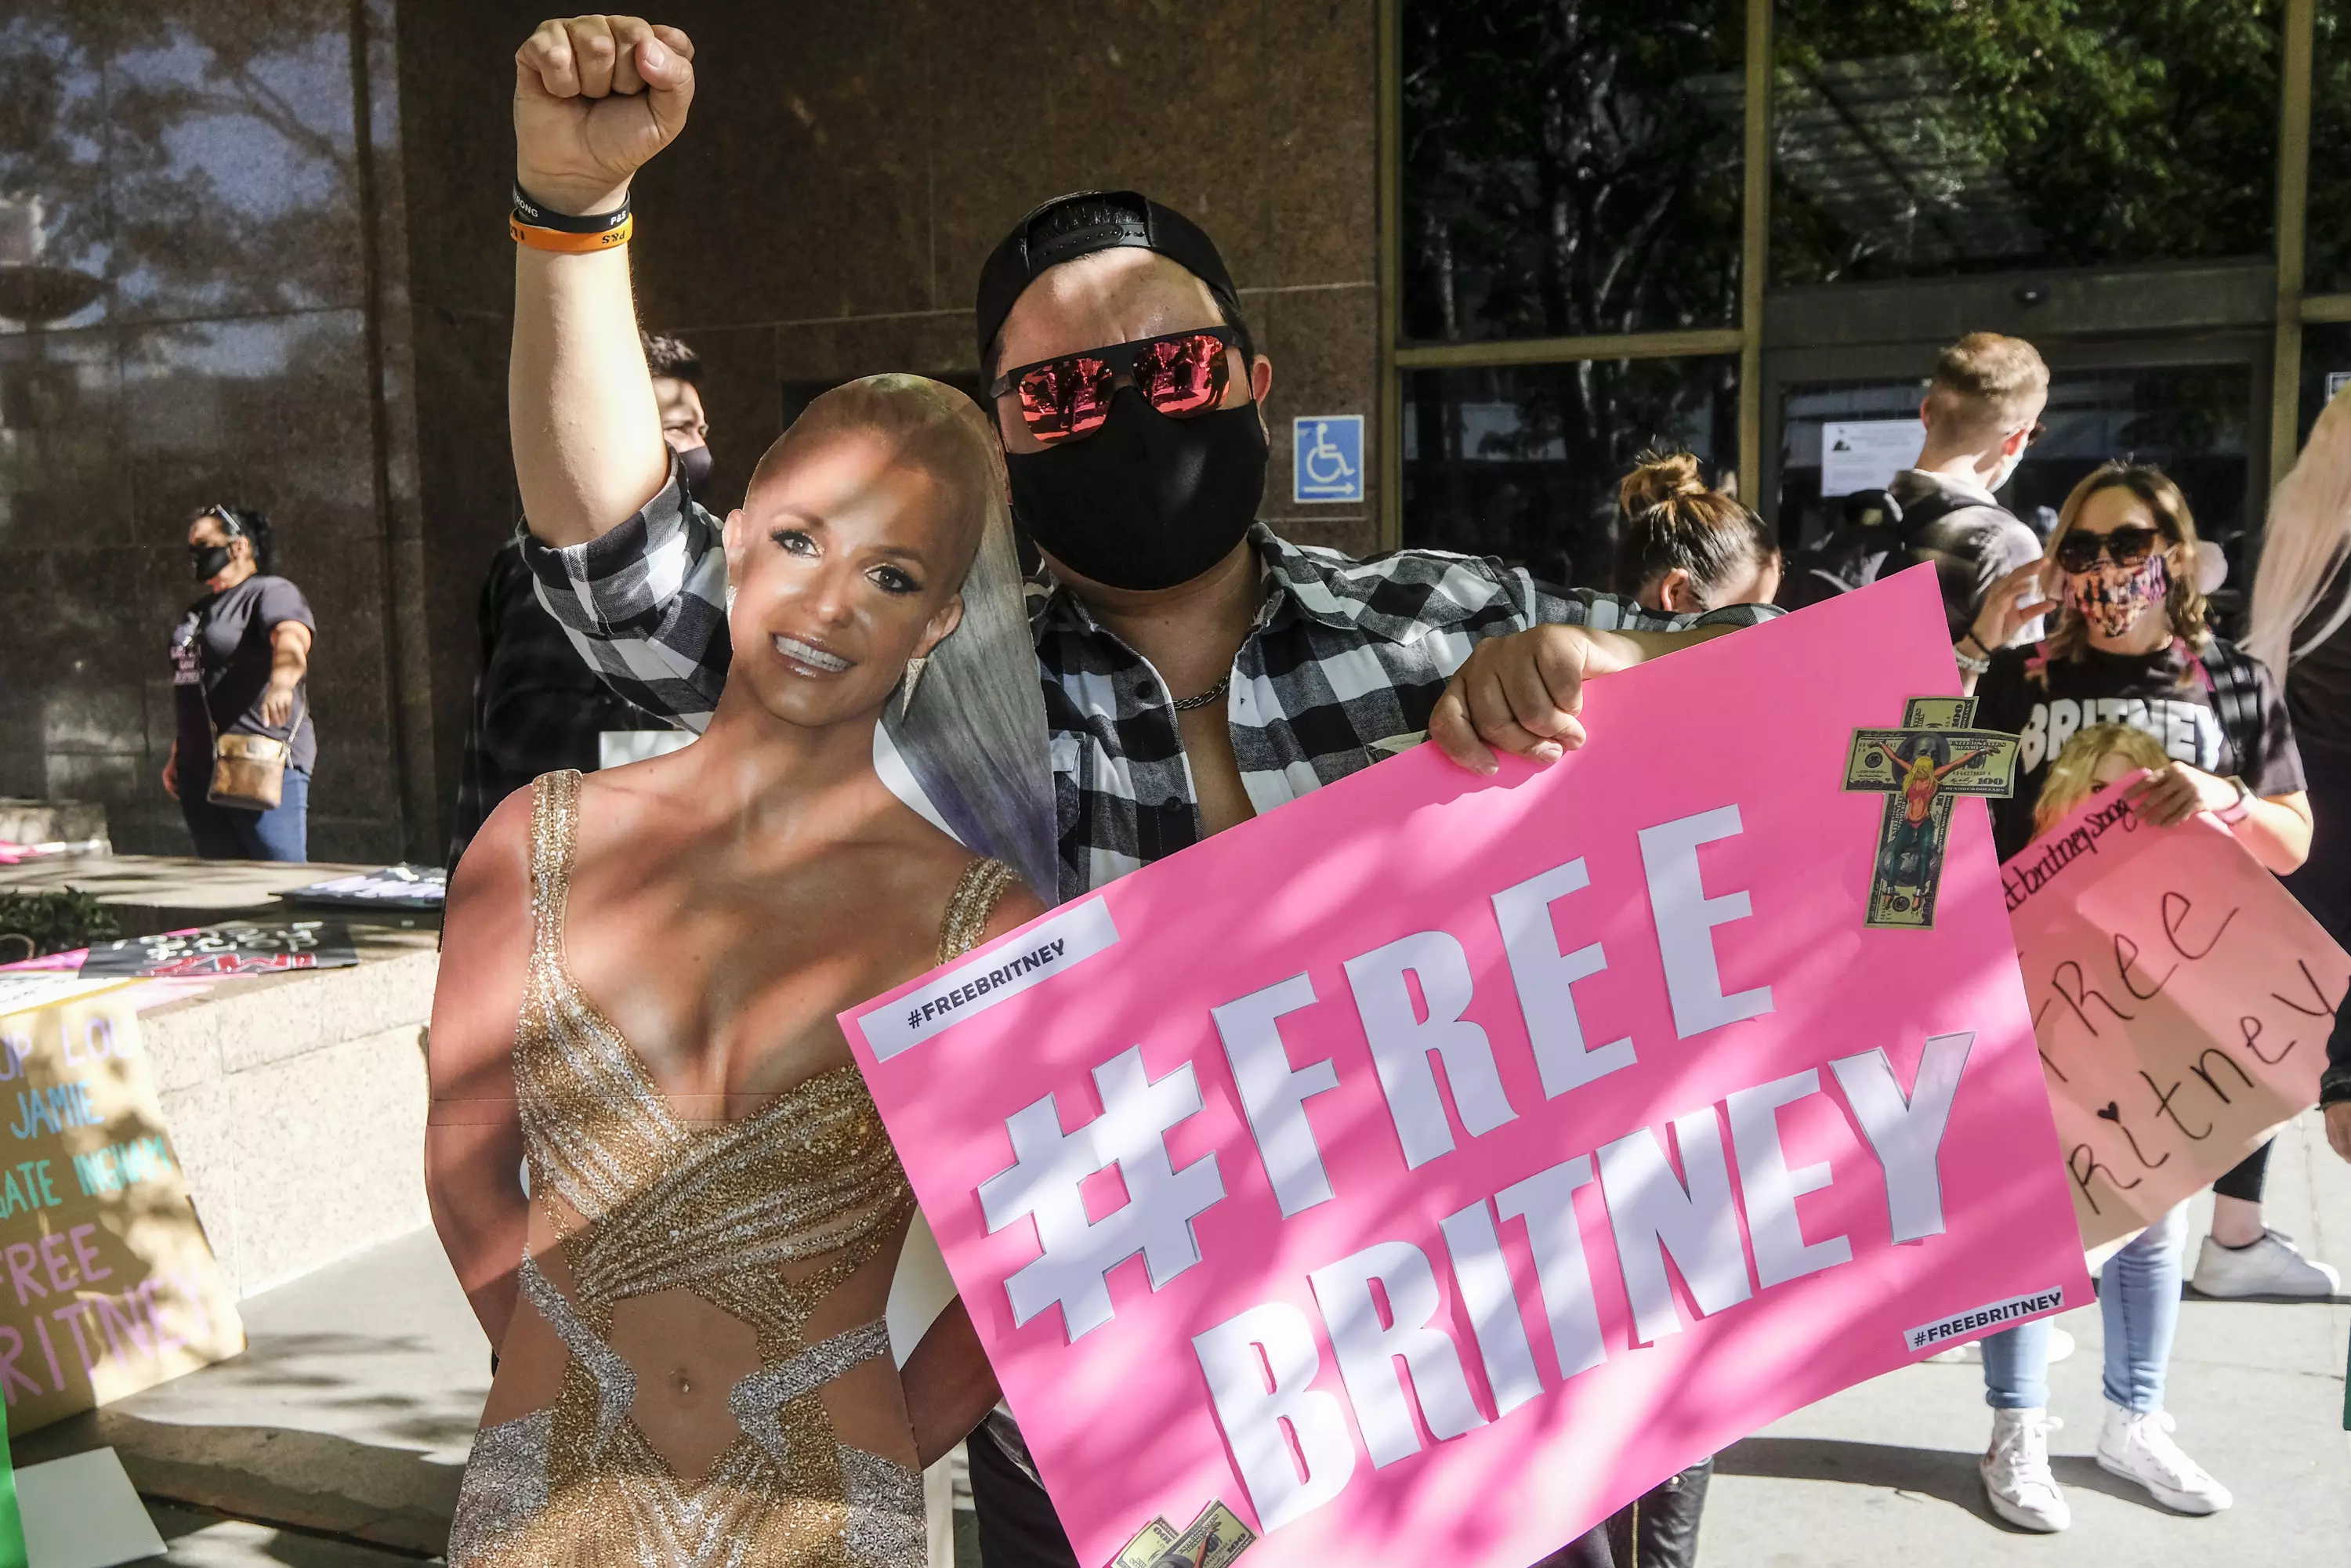 Fans have been campaigning for the singer under the #FreeBritney movement.